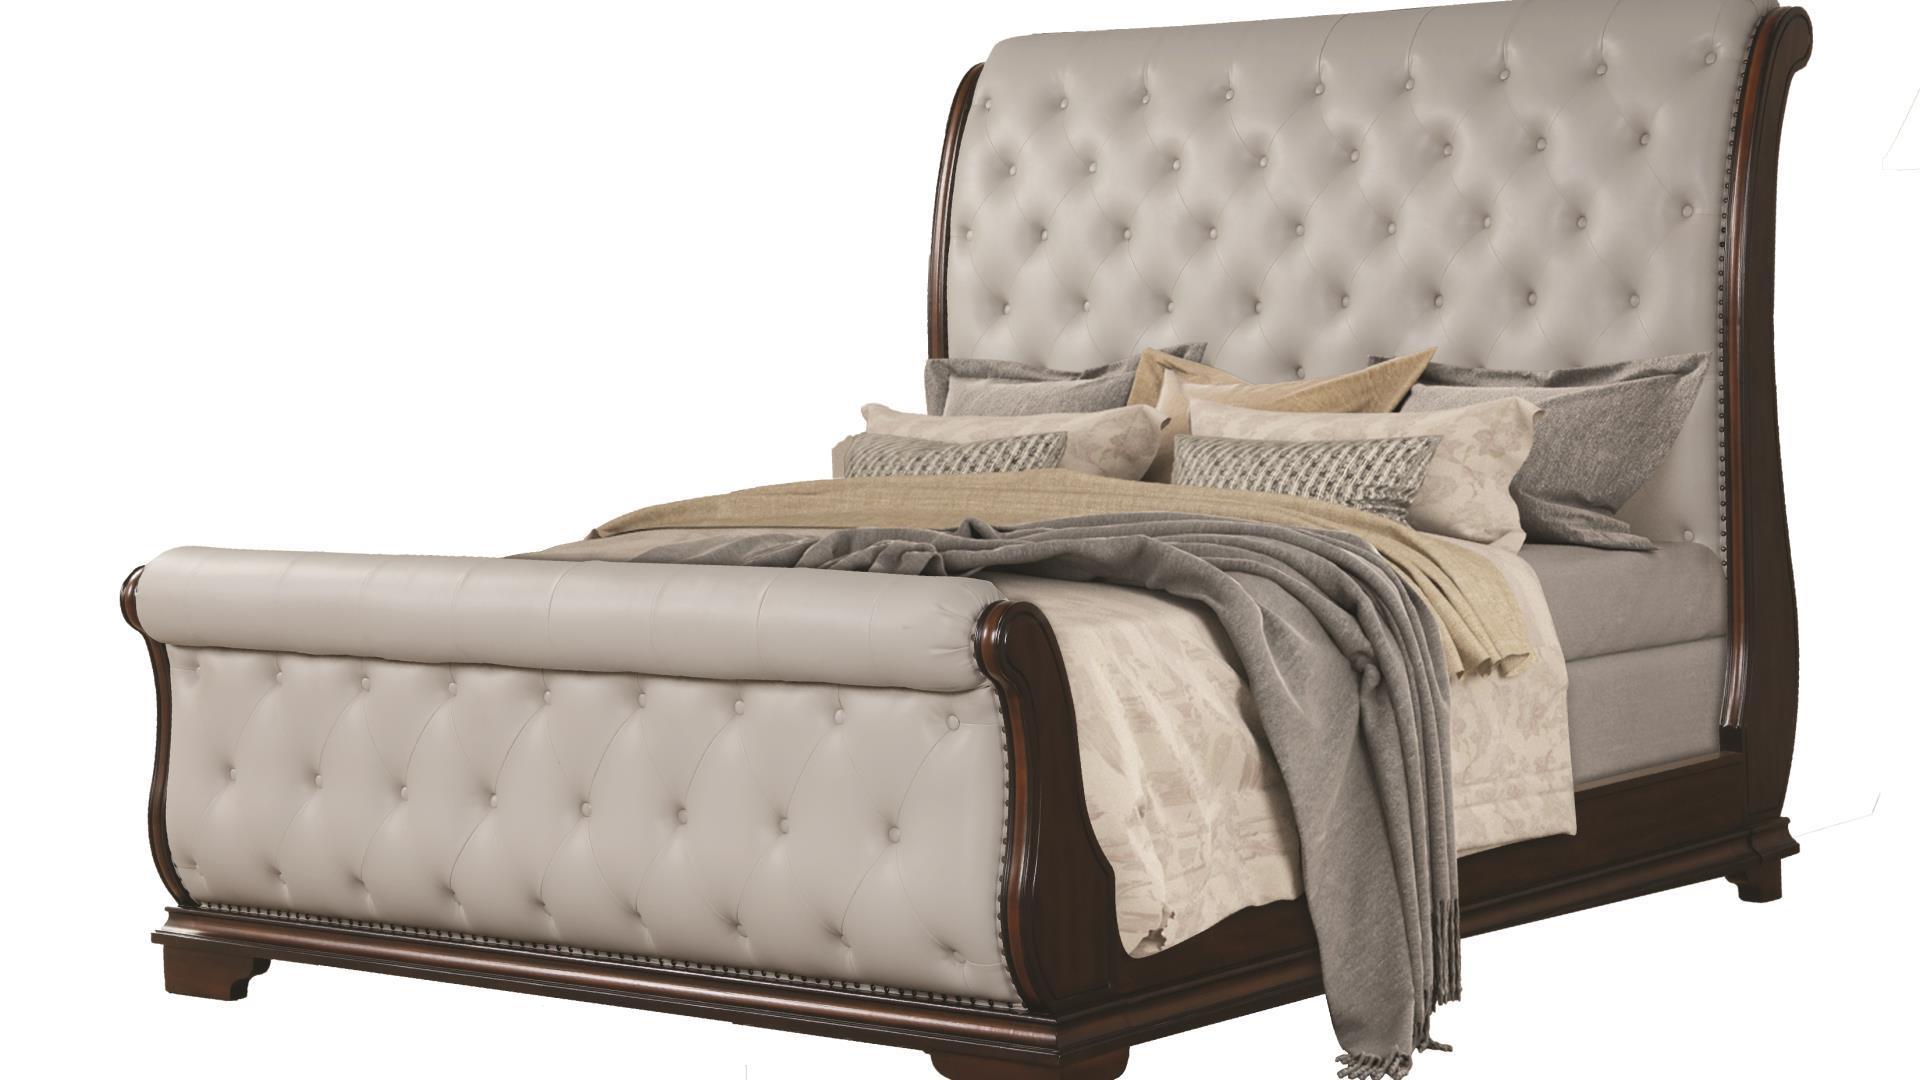 

    
White Tufted Sleigh Queen Bedroom Set 5P MONTAGE Galaxy Home Traditional Classic
